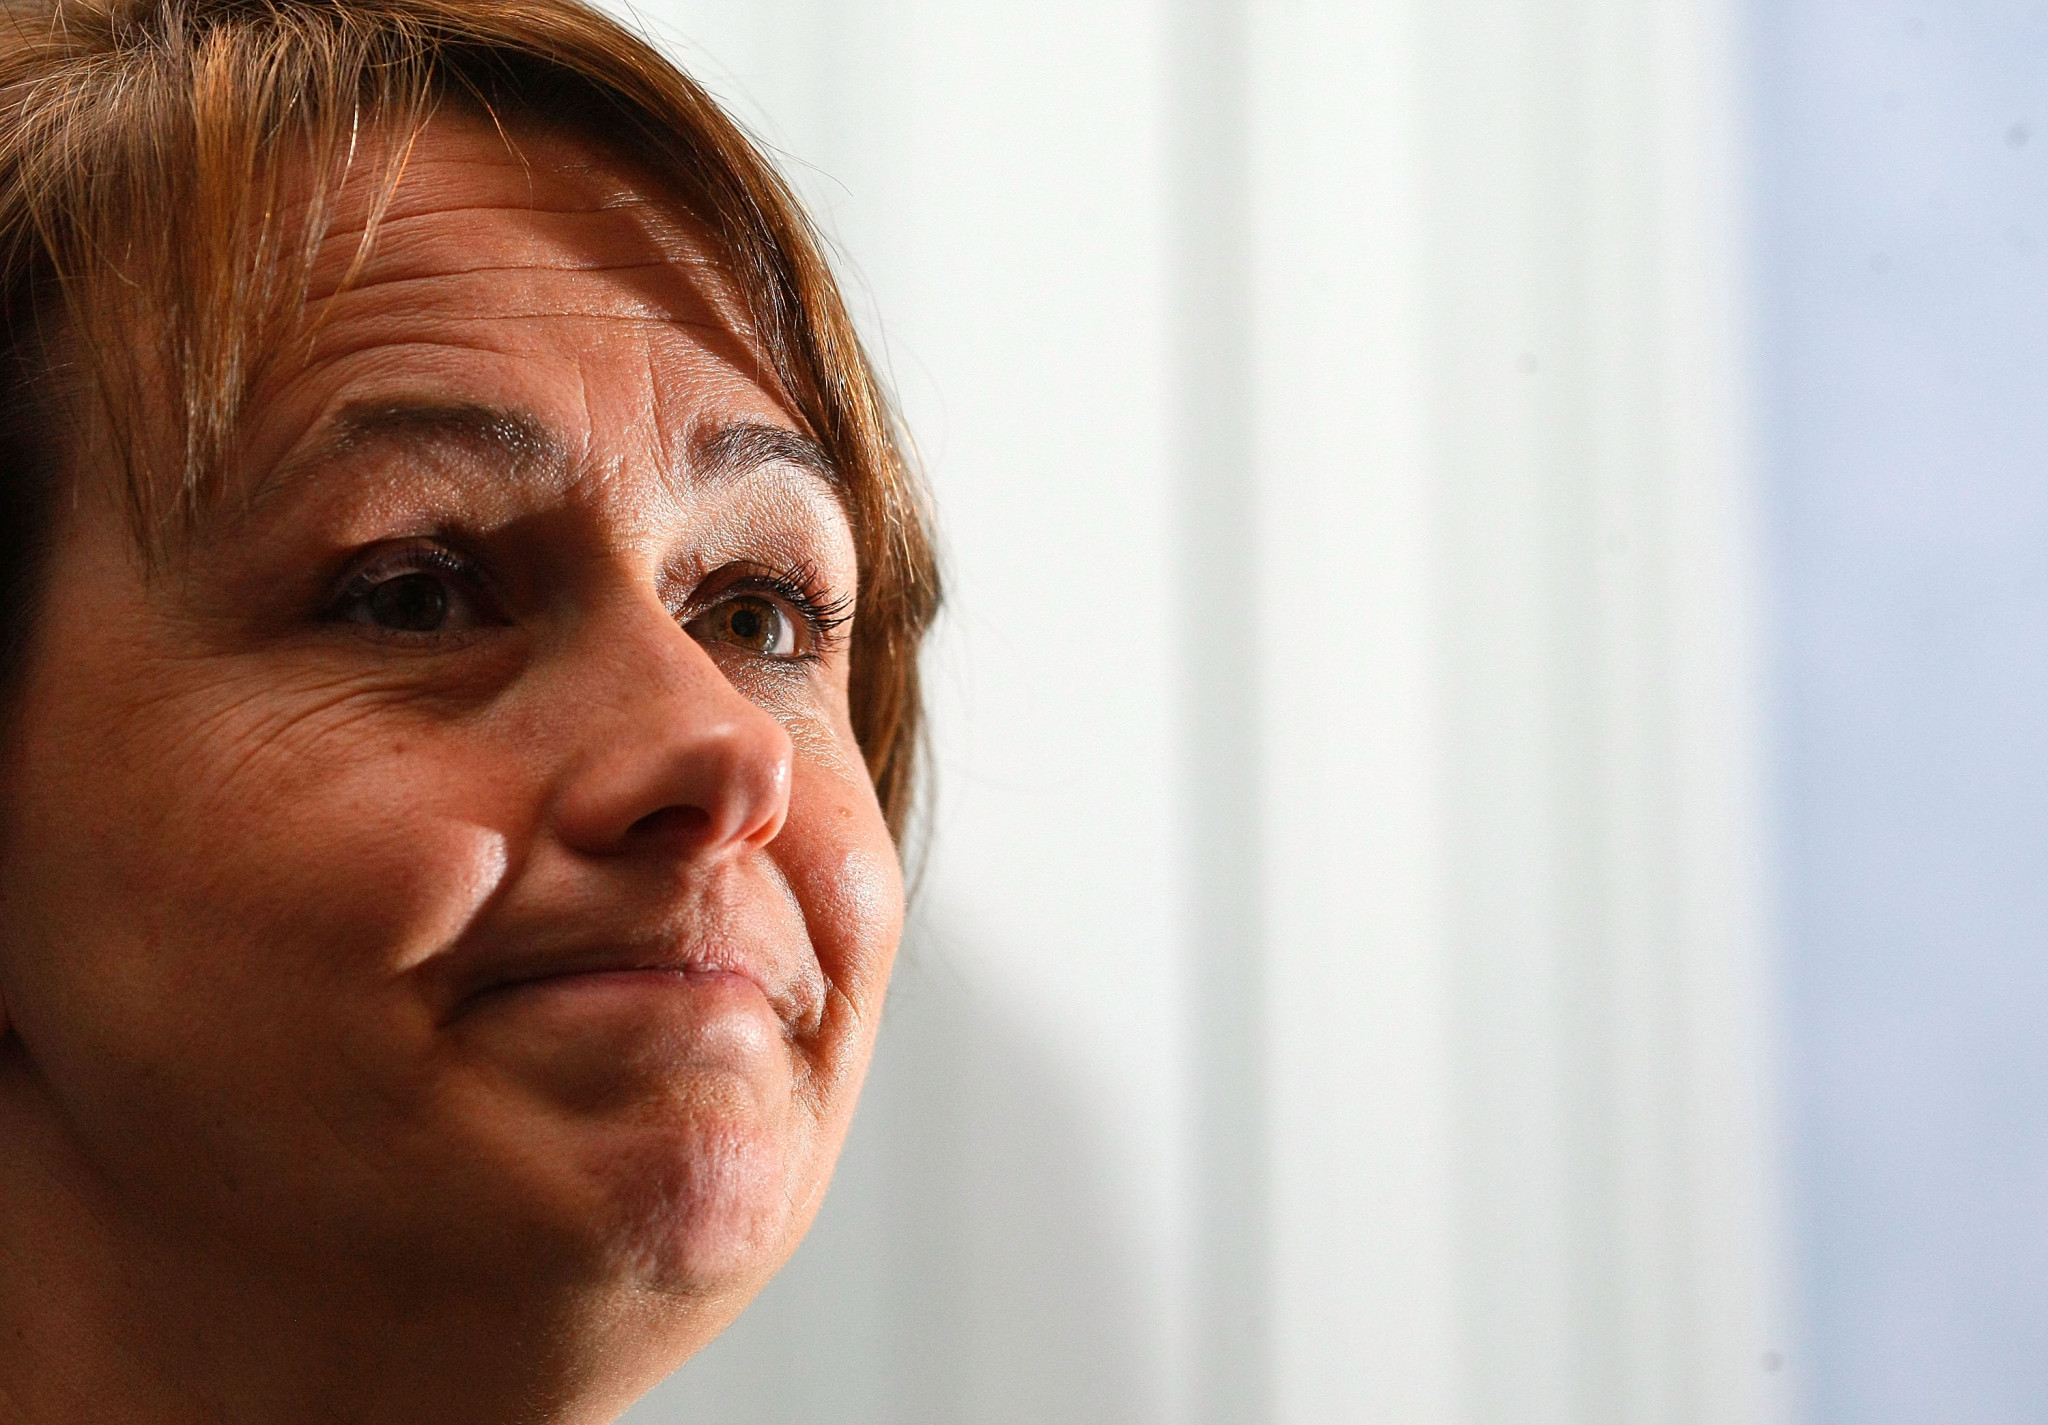 Dame Tanni-Grey Thompson, who led a duty of care review in 2017 says she does not believe enough has been done to support athletes ©Getty Images